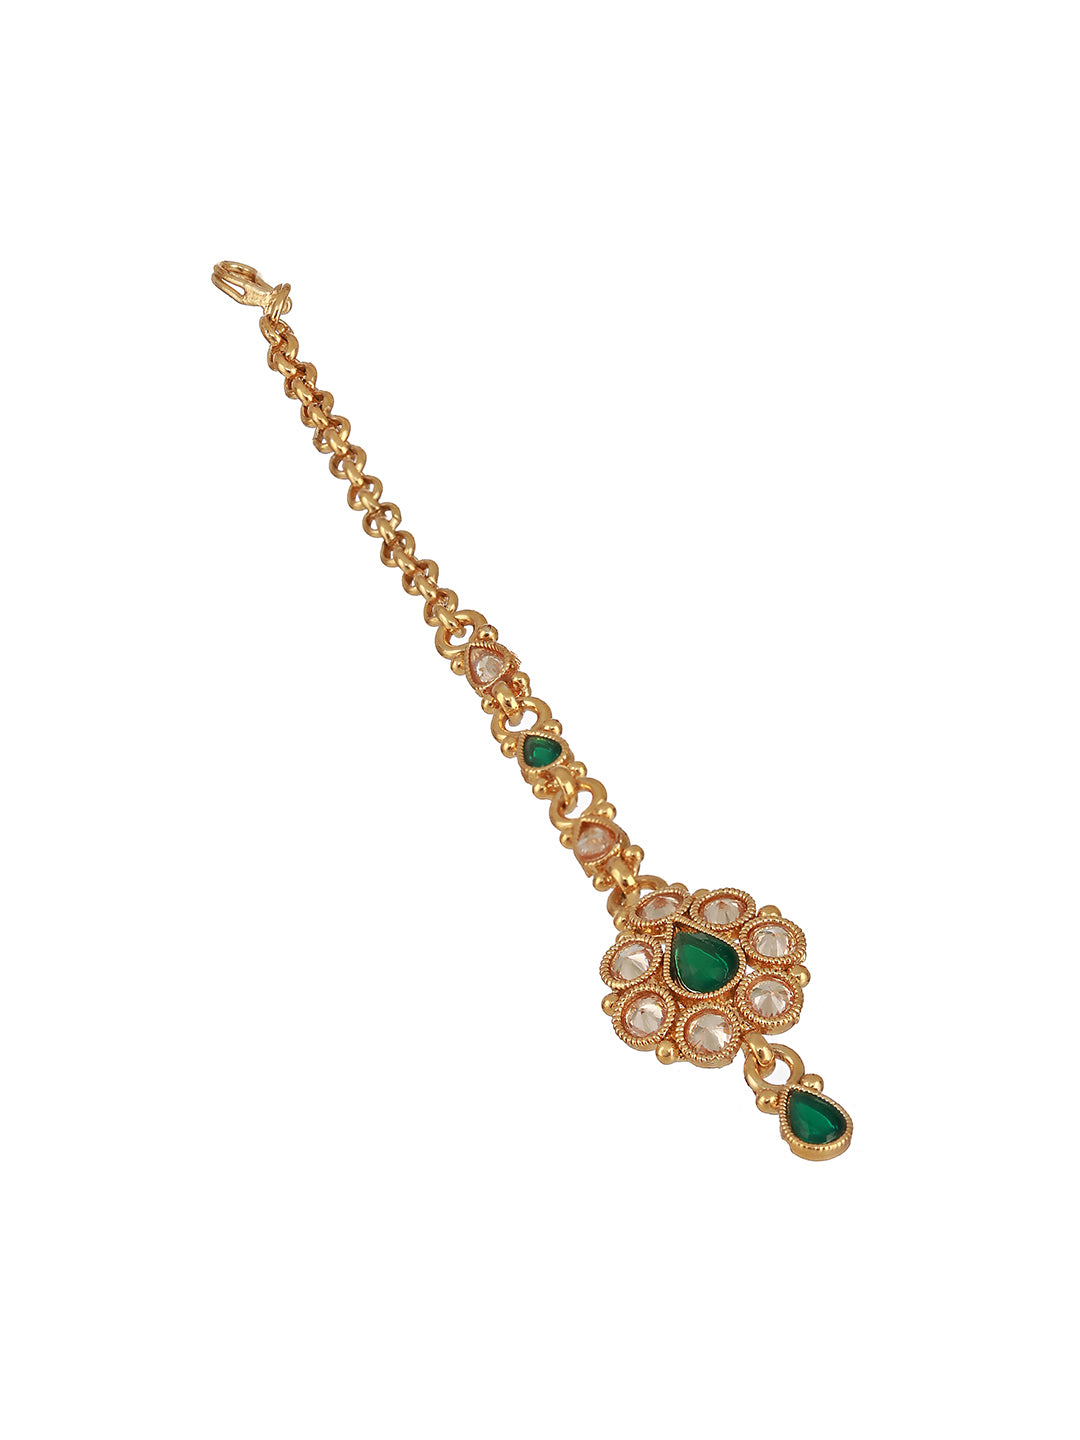 Gold-Plated Green & White Faux Kundan-Studded Handcrafted Maang Tika